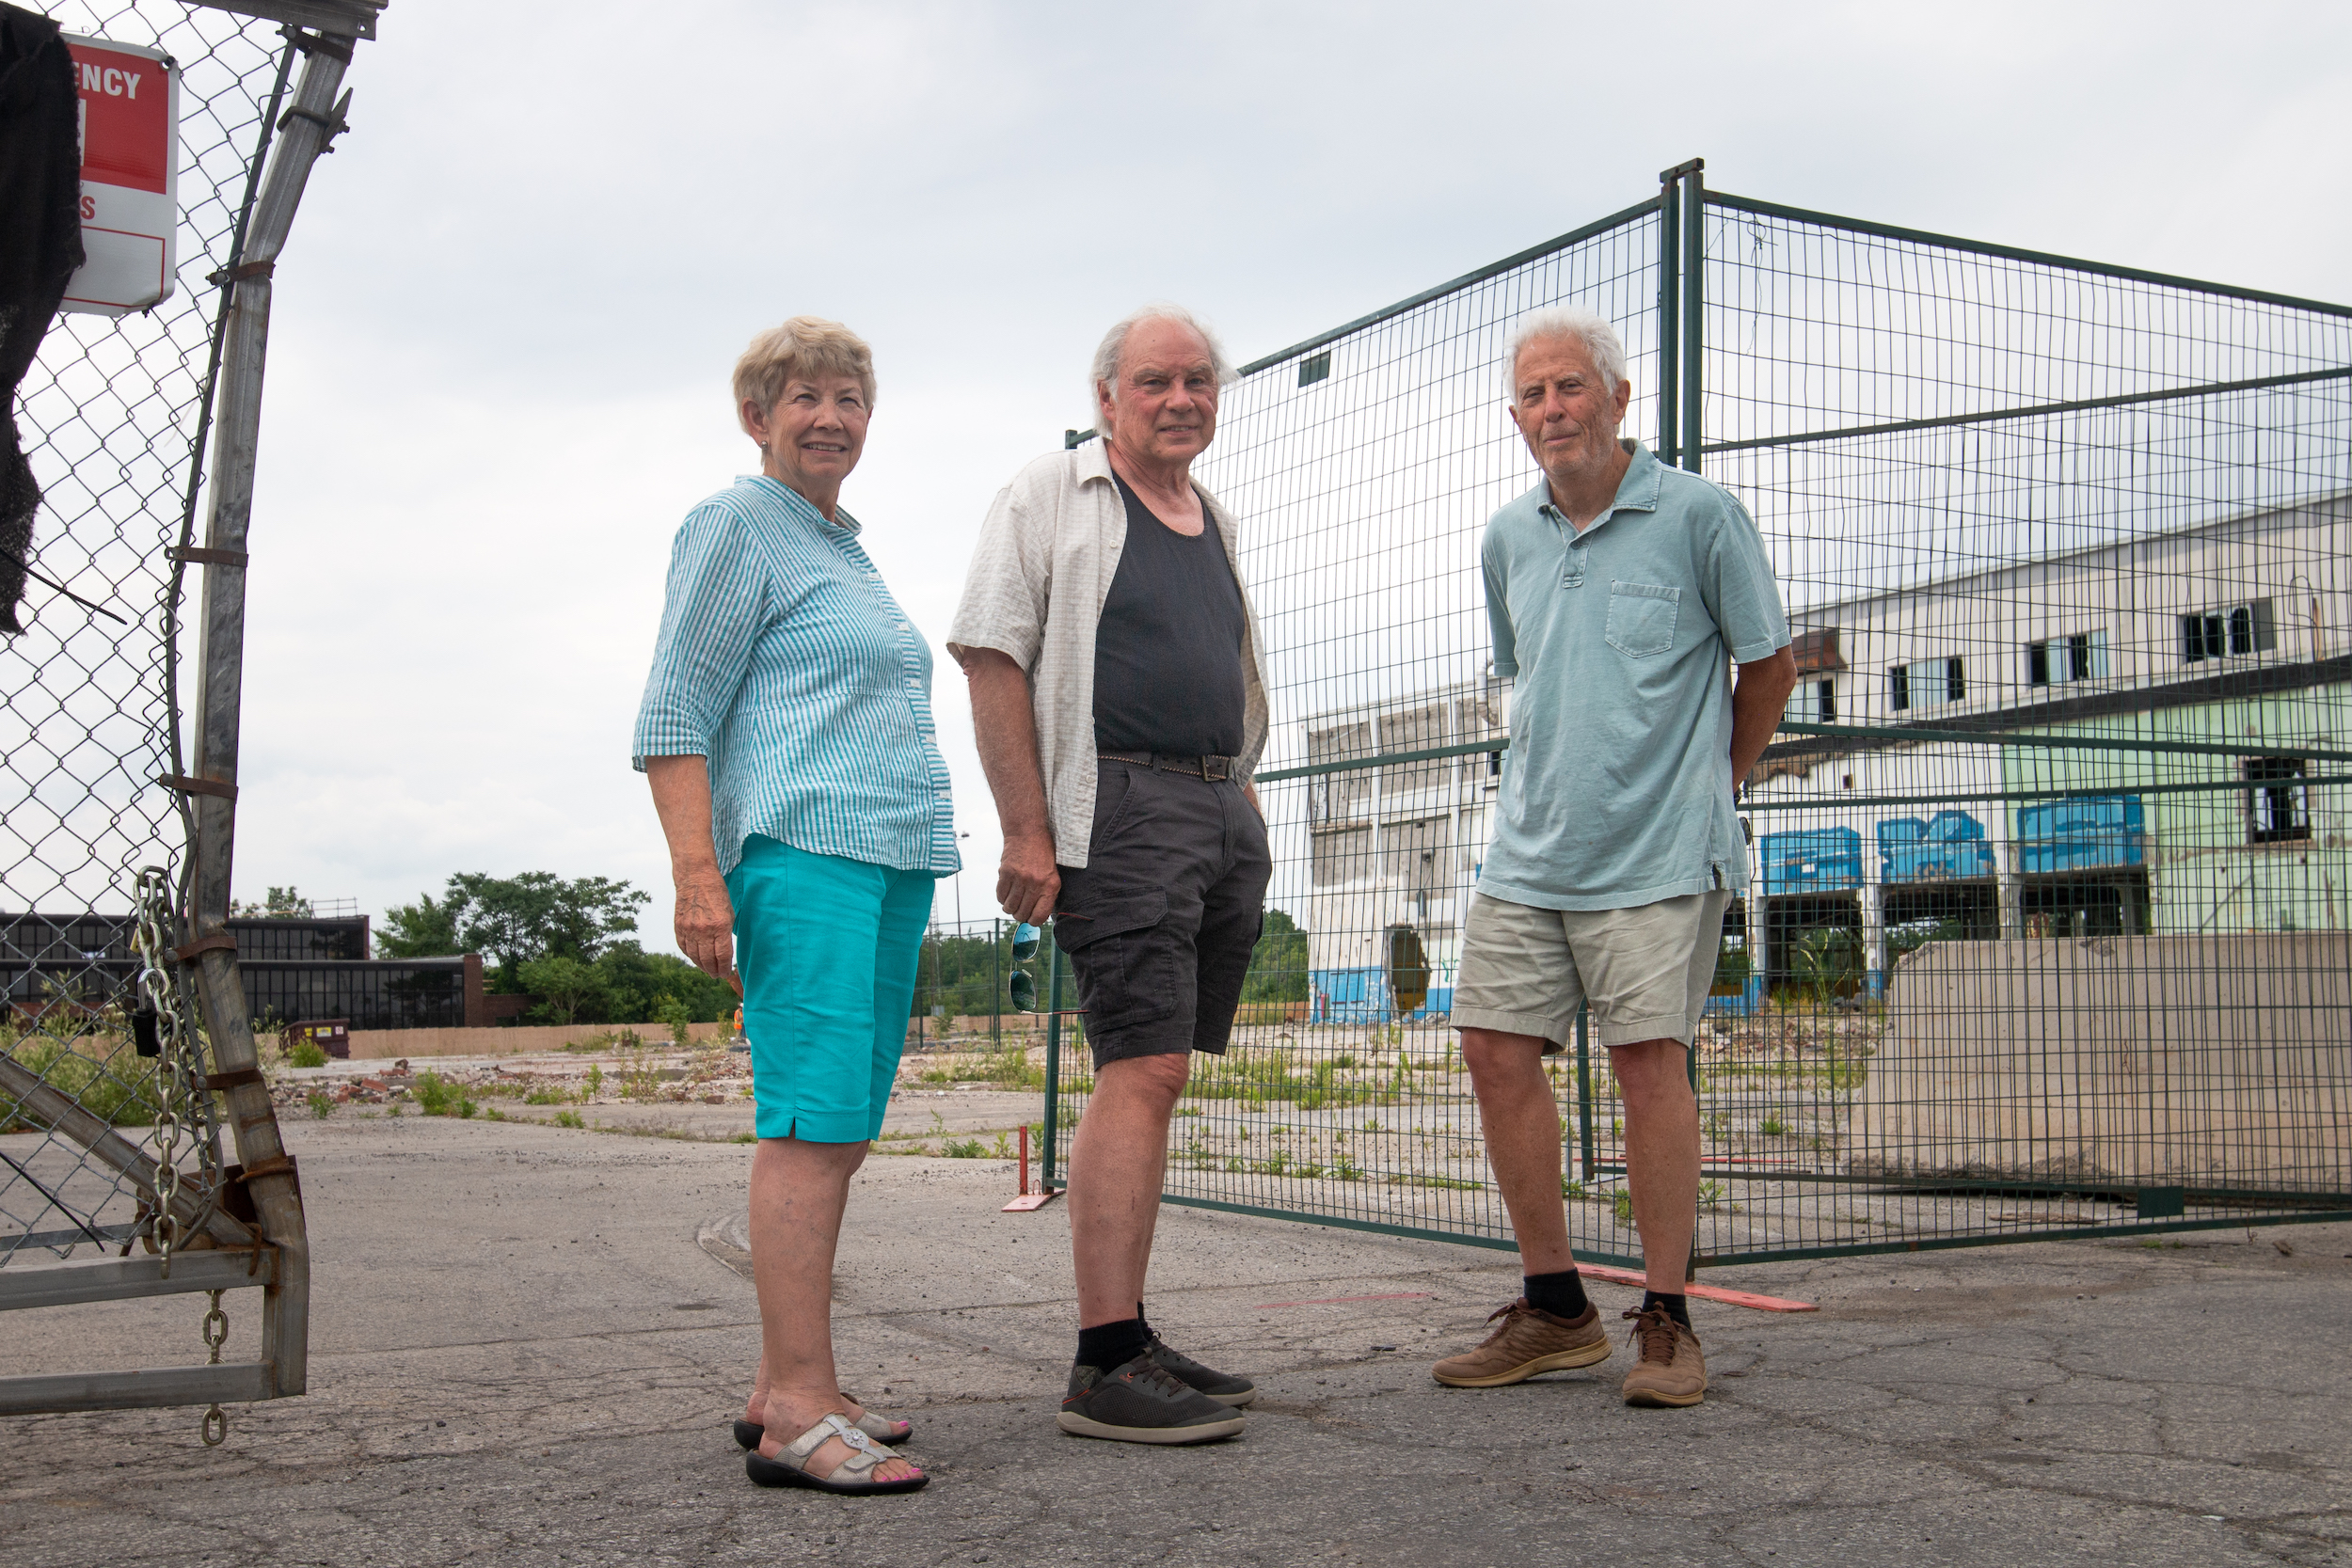 Members of the Coalition for a Better St. Catharines outside a derelict former General Motors site in St. Catharines, Ont. Photo: Ramona Leitao / The Narwhal